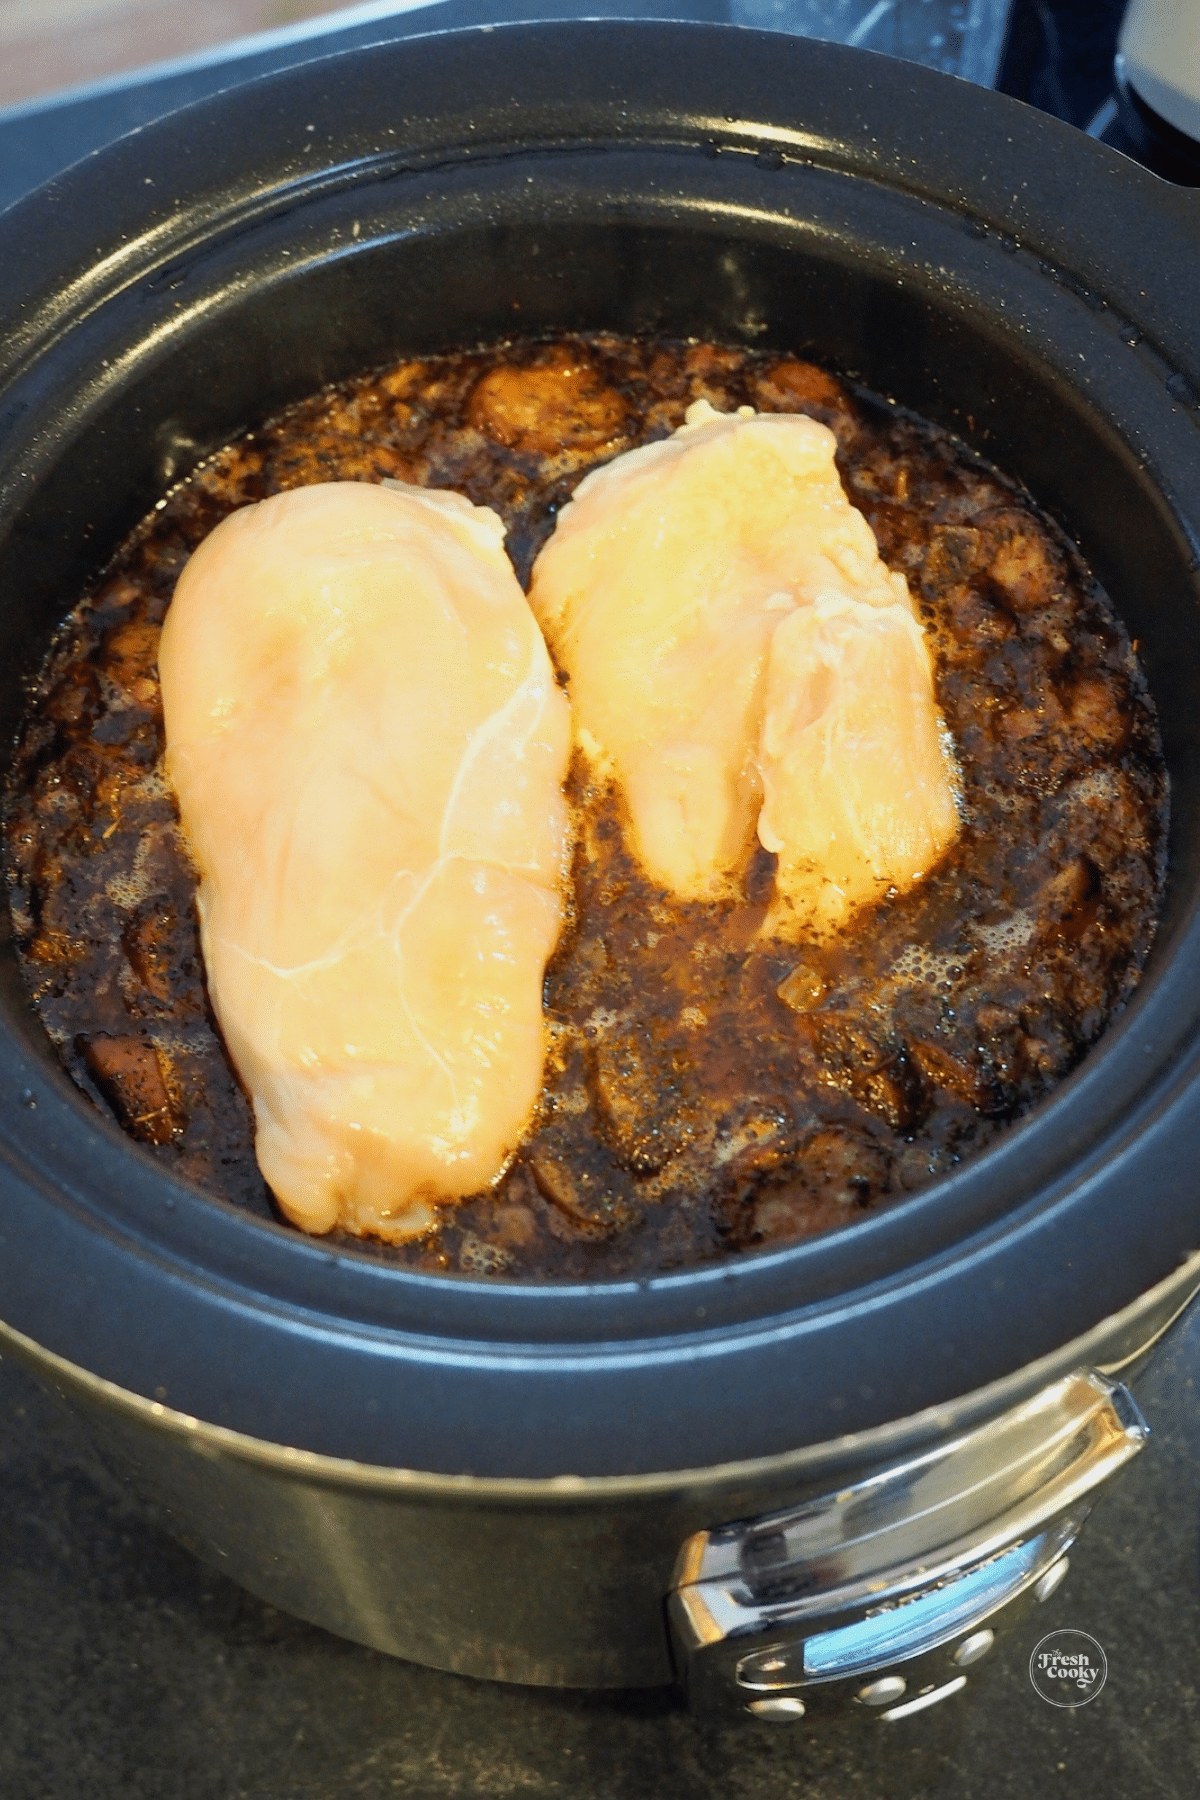 Add chicken breasts to slow cooker a few hours before it's ready to serve.